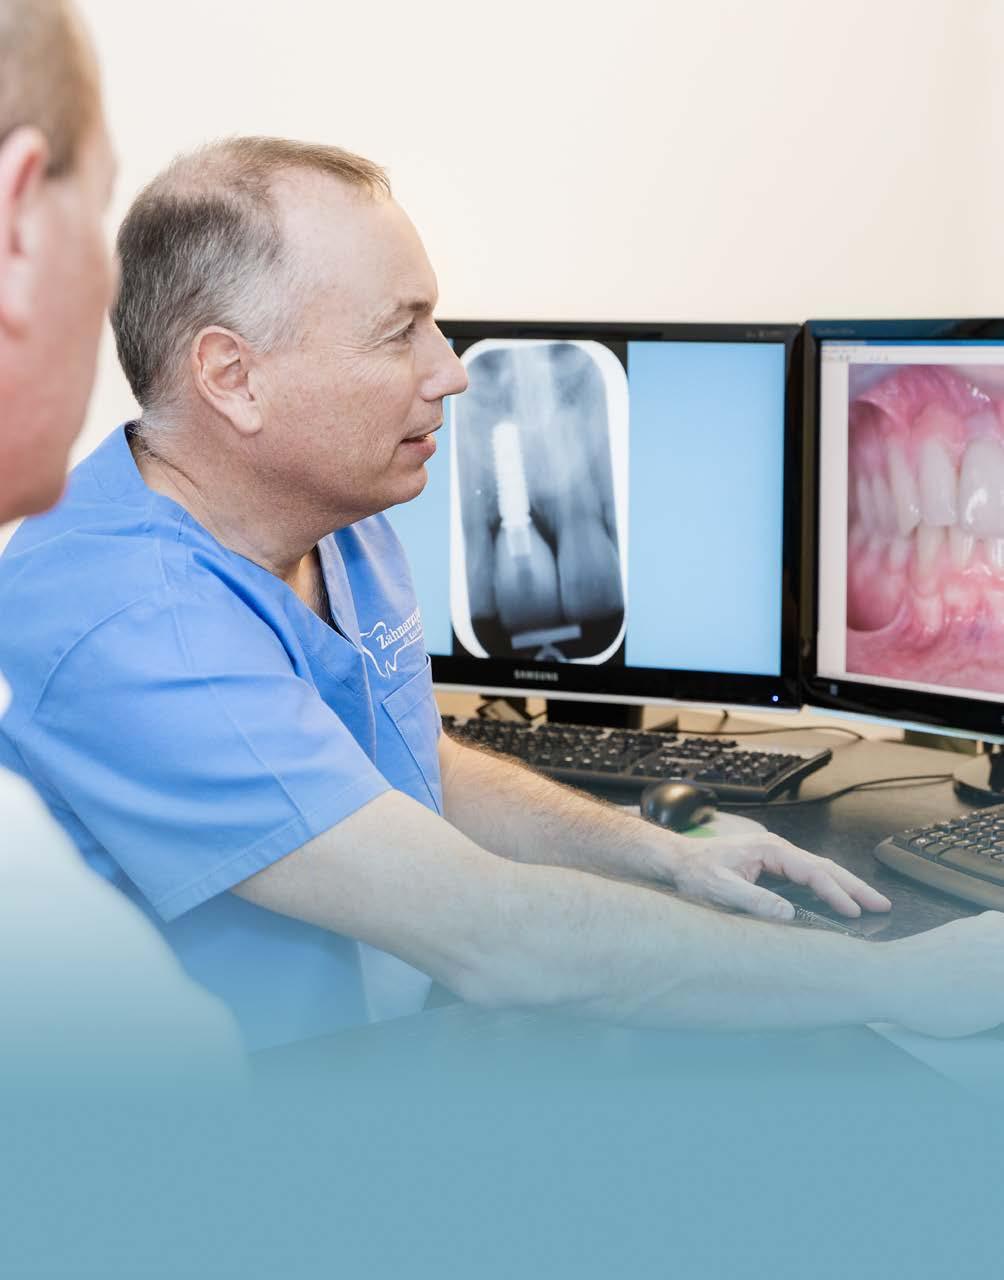 THE DIGITAL DENTIST DIGITAL WORKFLOW LEADS TO IMMEDIATE IMPLANT PLACEMENT Learn how the right systems and software can lead to a faster final outcome.